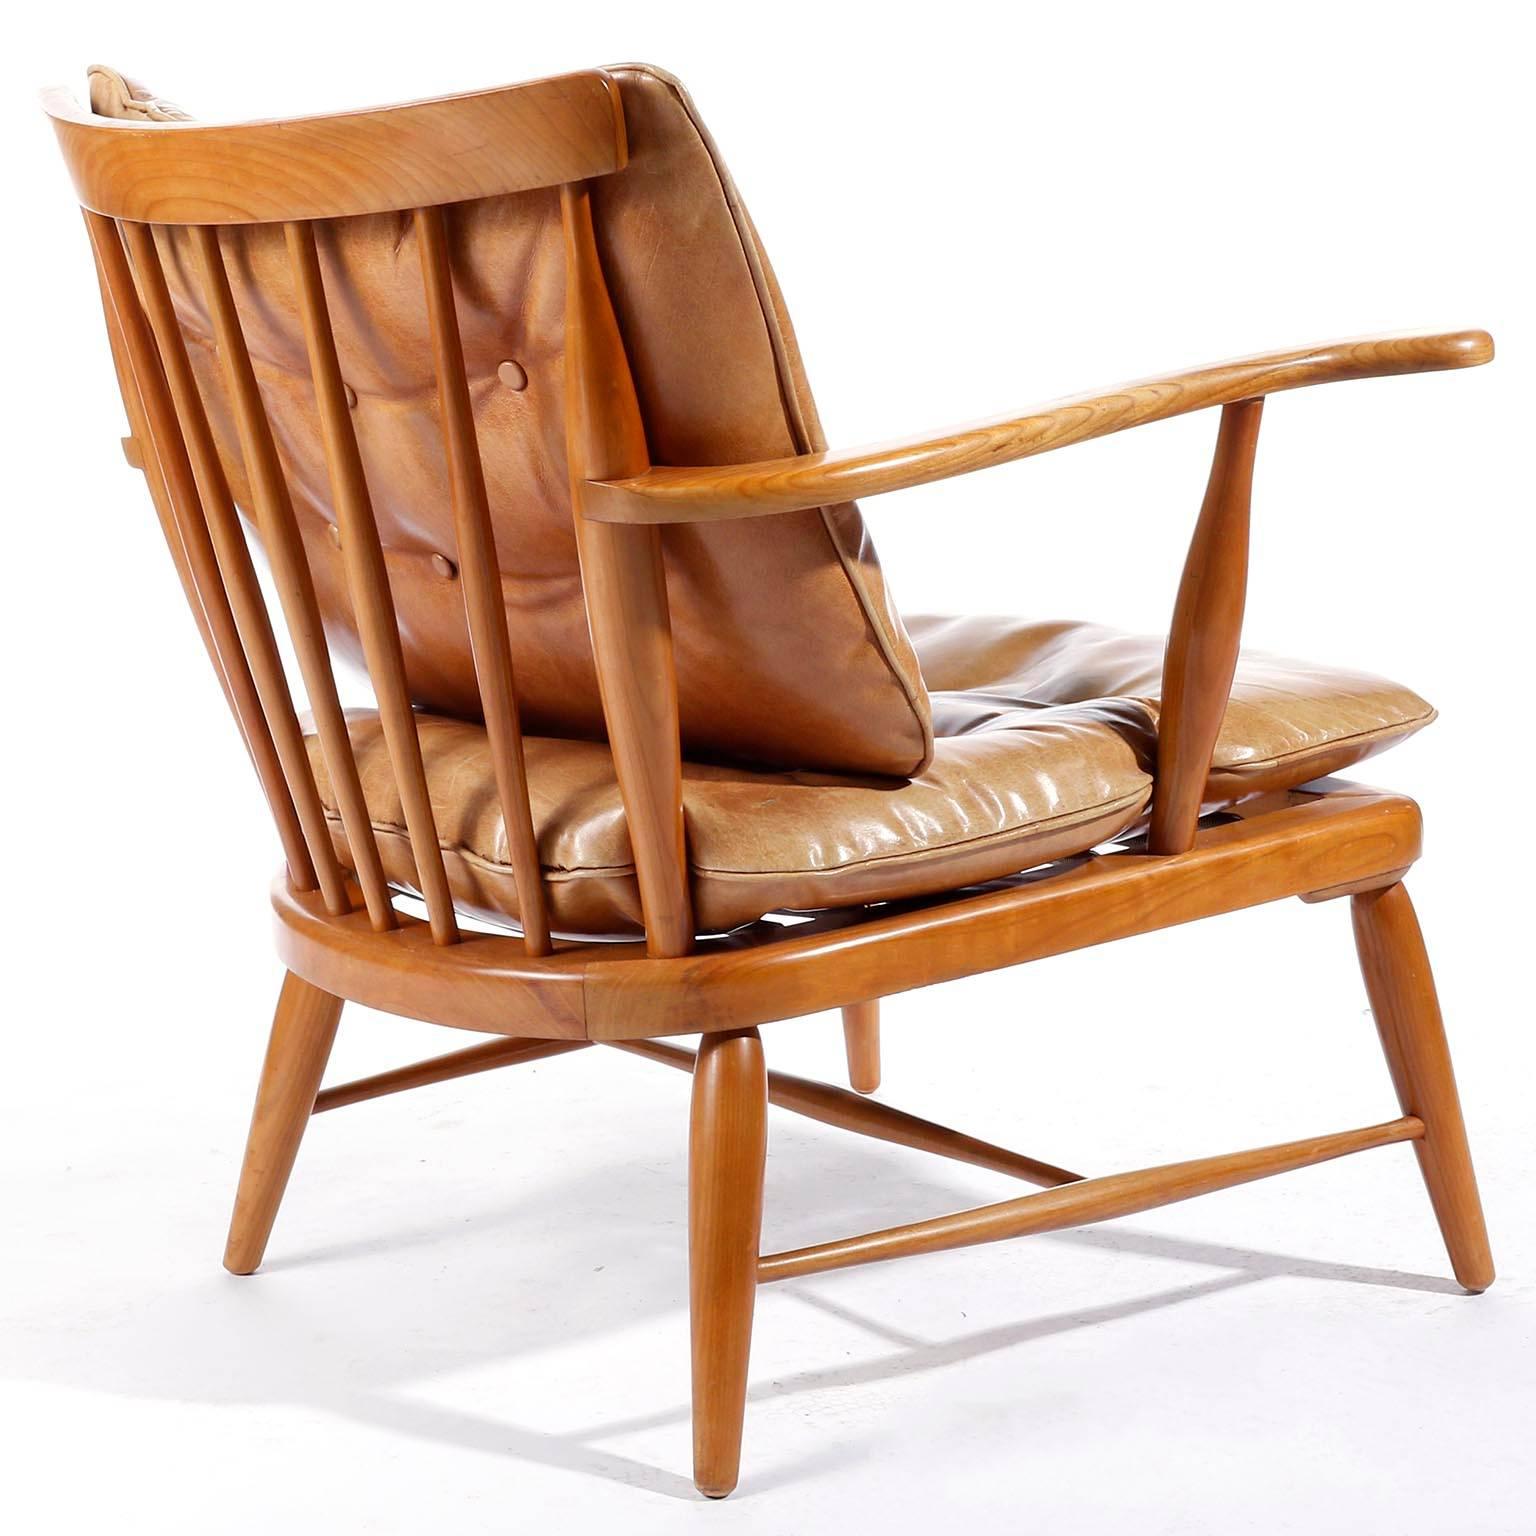 Mid-Century Modern, Arm Chair in Wood and Patinated Cognac Leather, 1950 For Sale 1